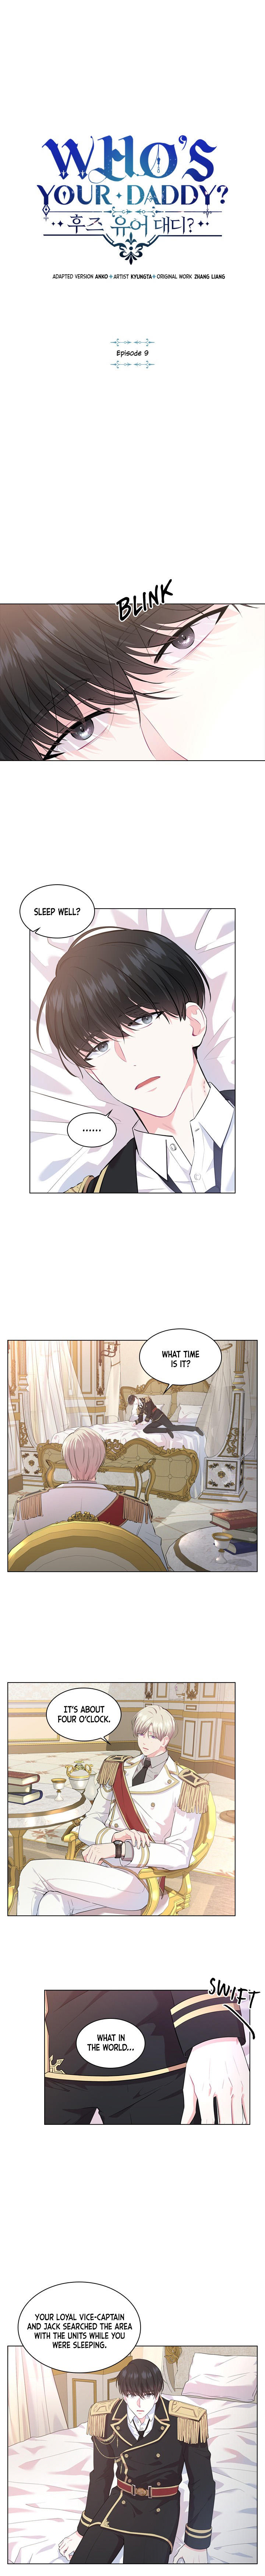 Your scan manhua whos daddy Who’s Your